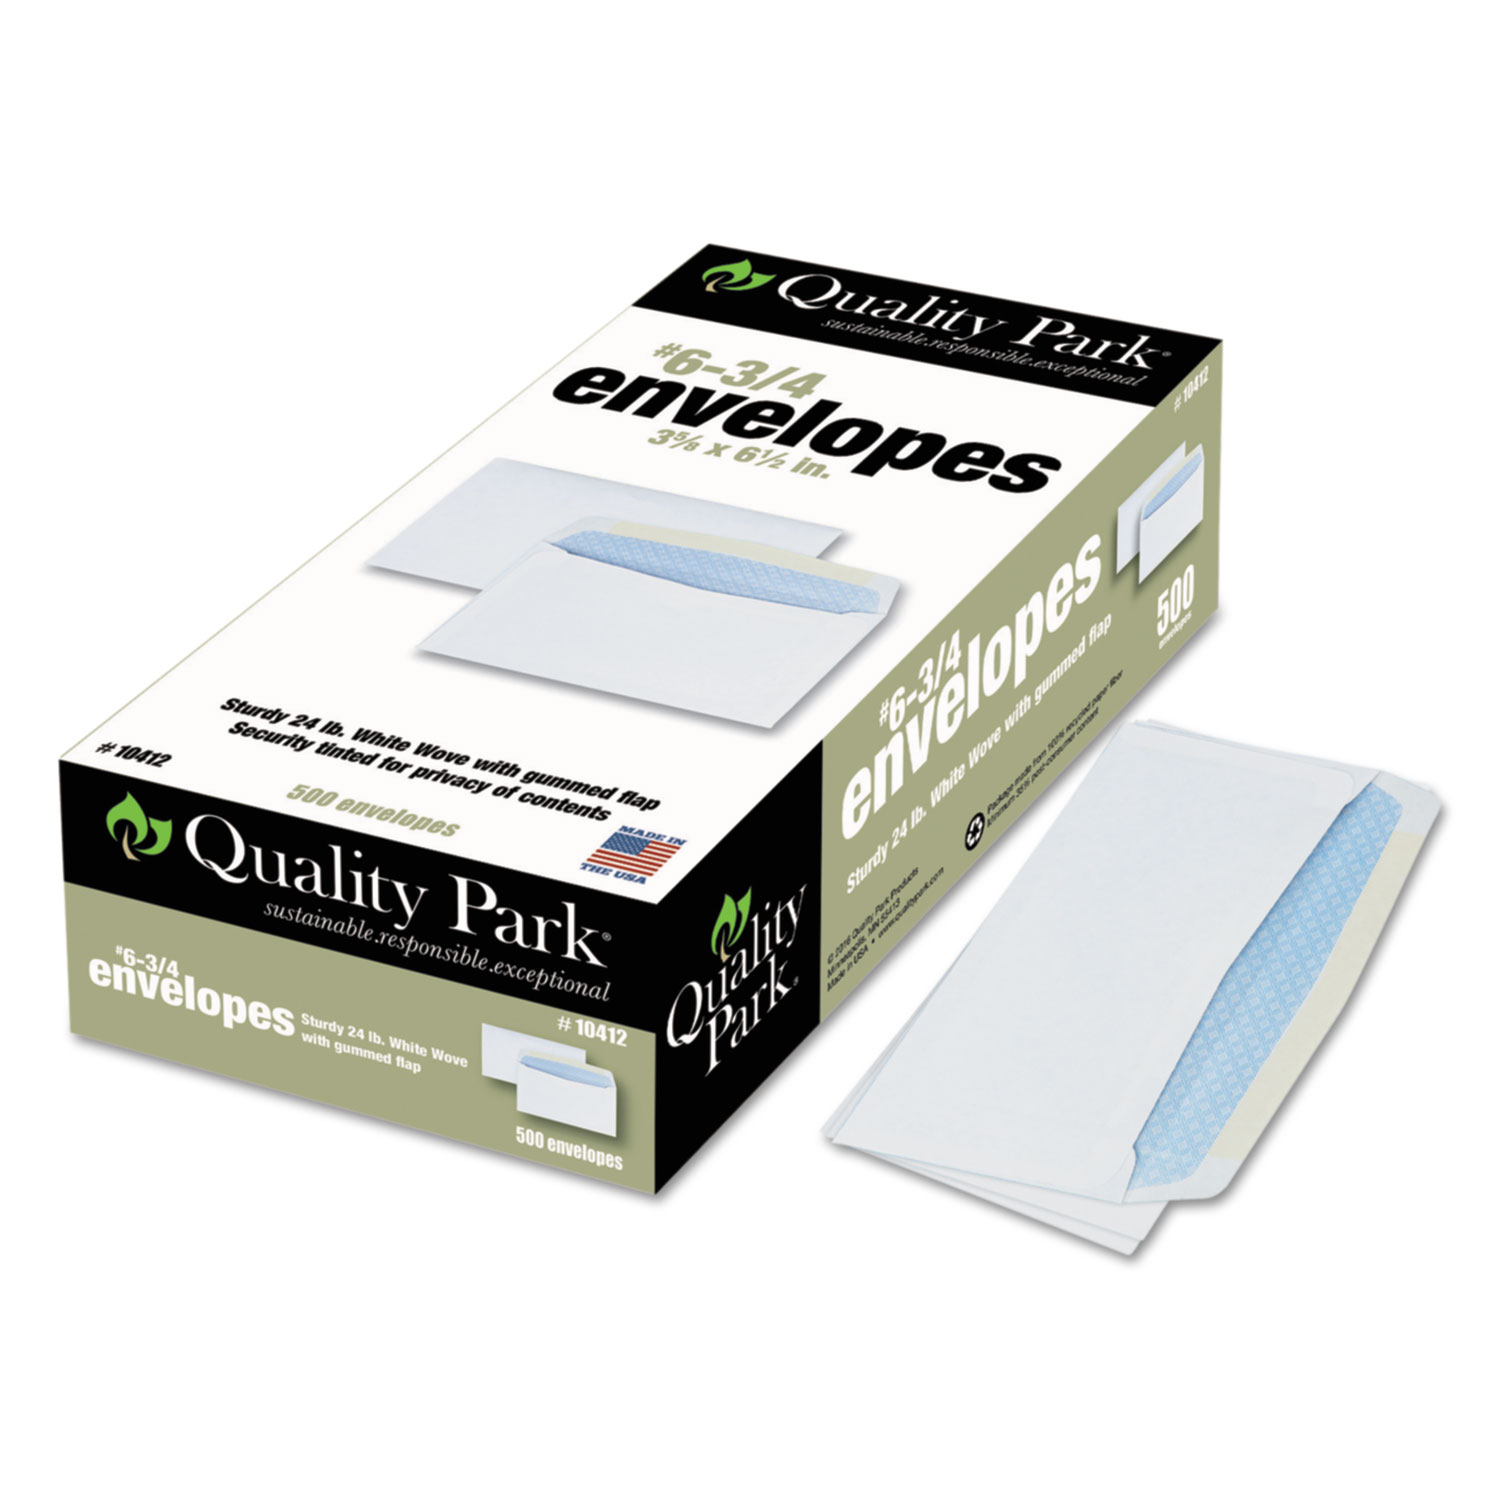 Security Tinted Business Envelope, #6 3/4, 3 5/8 x 6 1/2, White, 500/Box